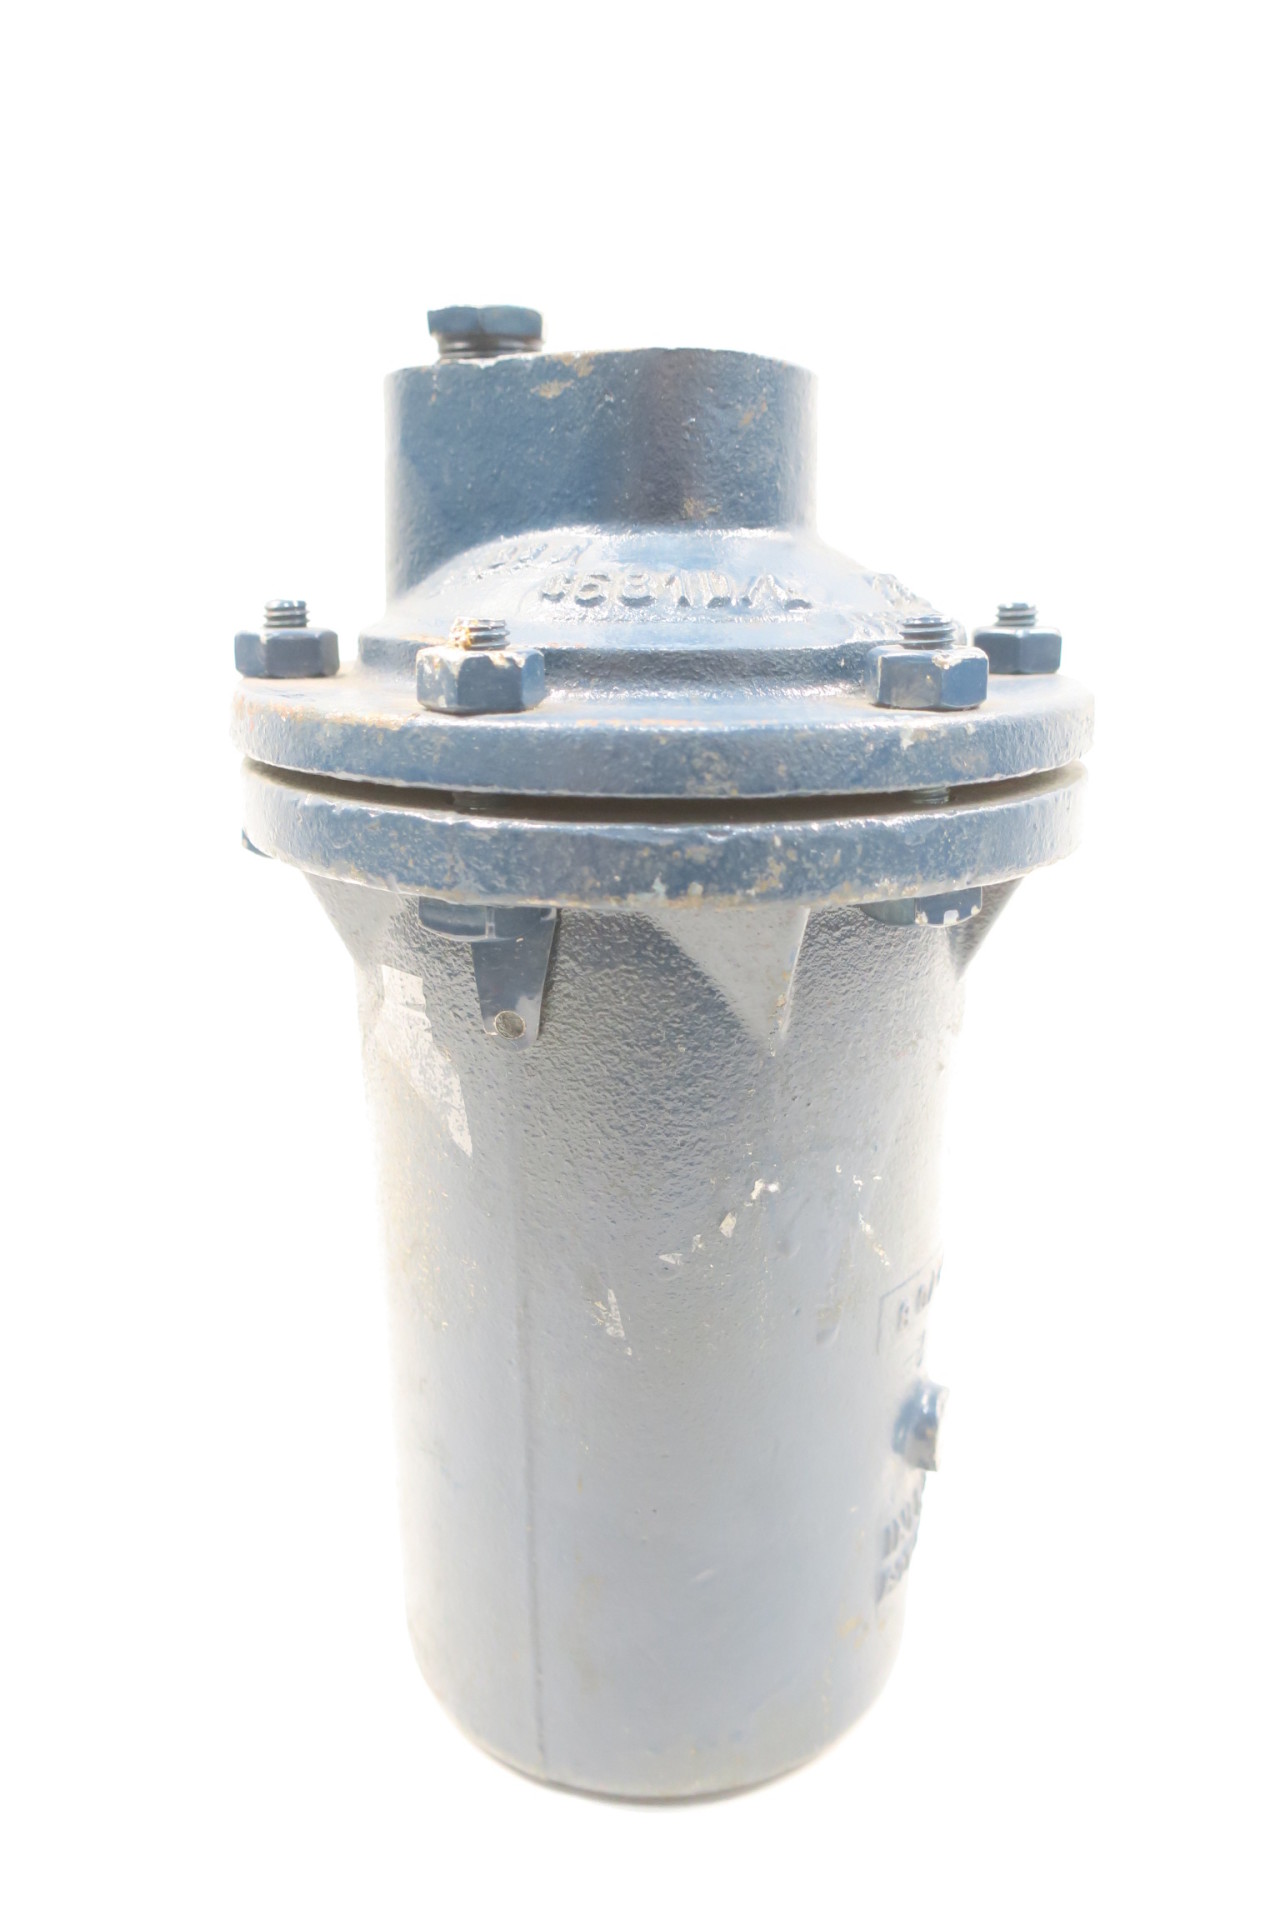 NEW ARMSTRONG 213 INVERTED BUCKET STEAM TRAP 1/2" NPT 